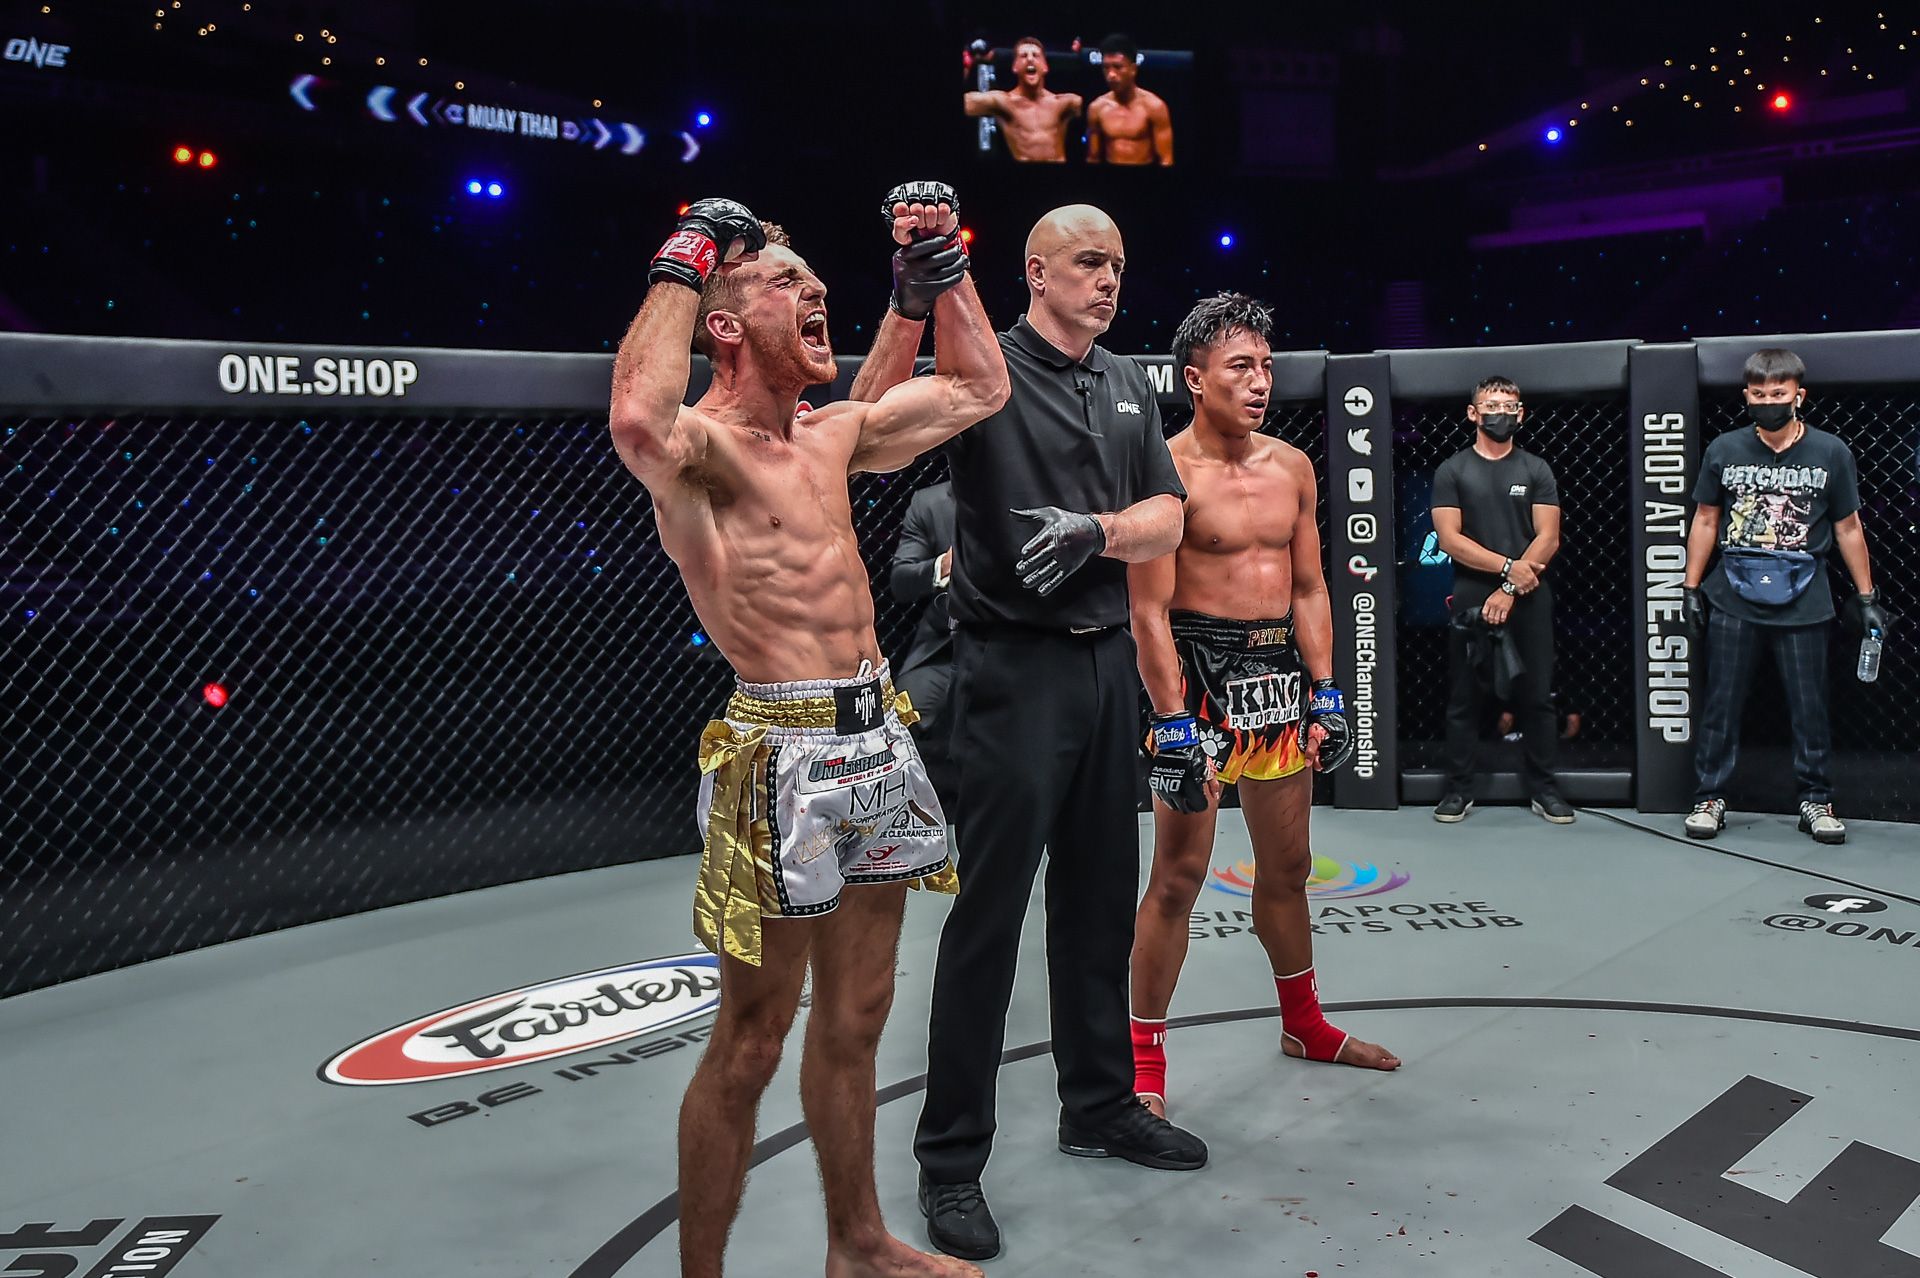 Jonathan Haggerty celebrating a win in ONE FC